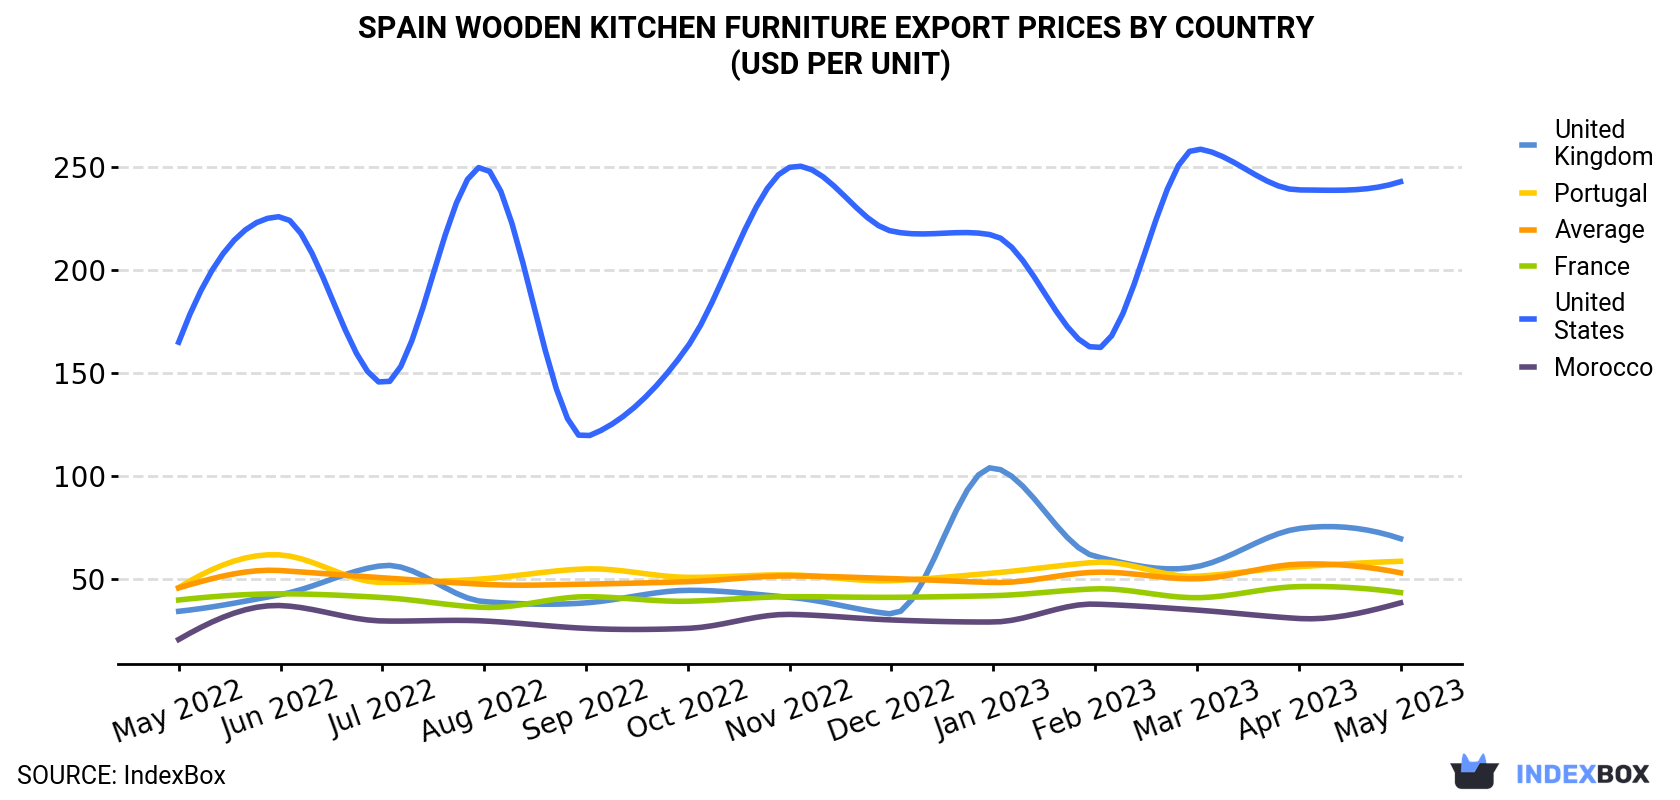 Spain Wooden Kitchen Furniture Export Prices By Country (USD Per Unit)